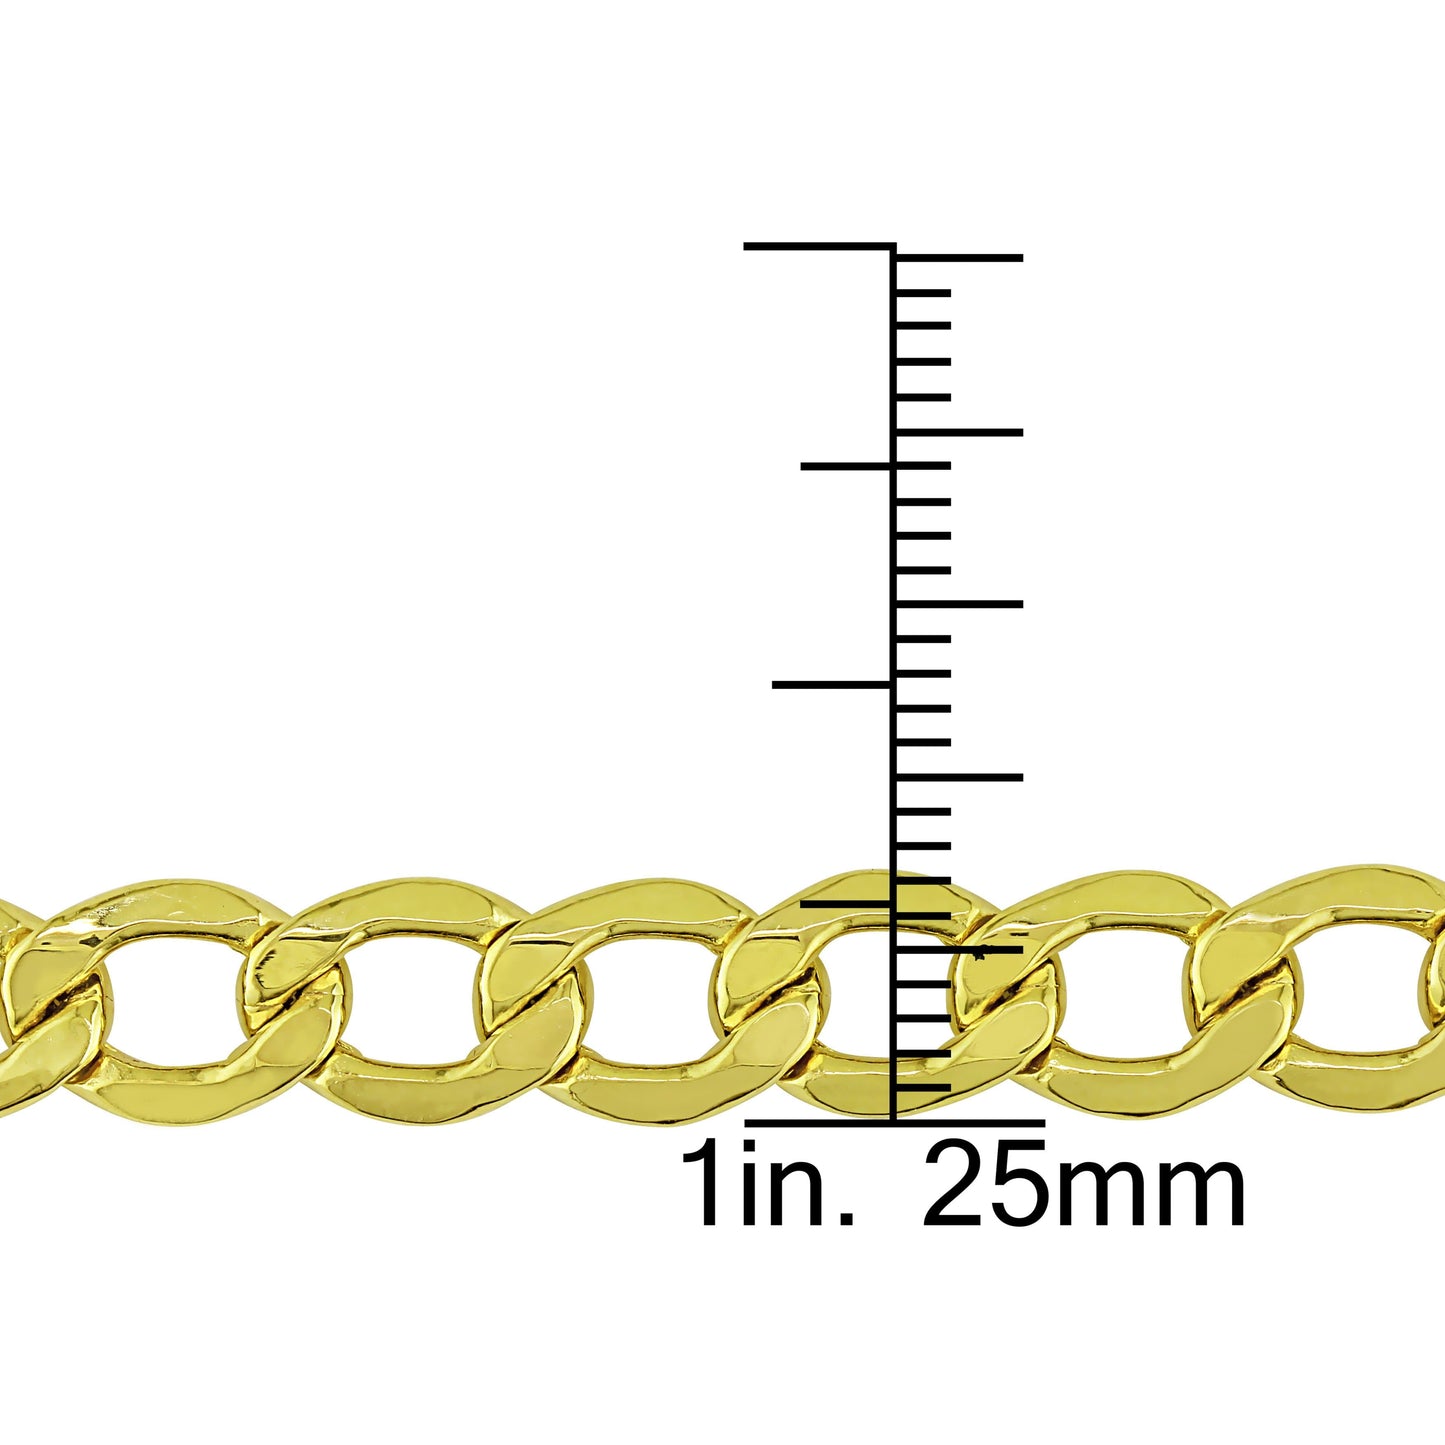 10k Yellow Gold Curb Bracelet in 7mm